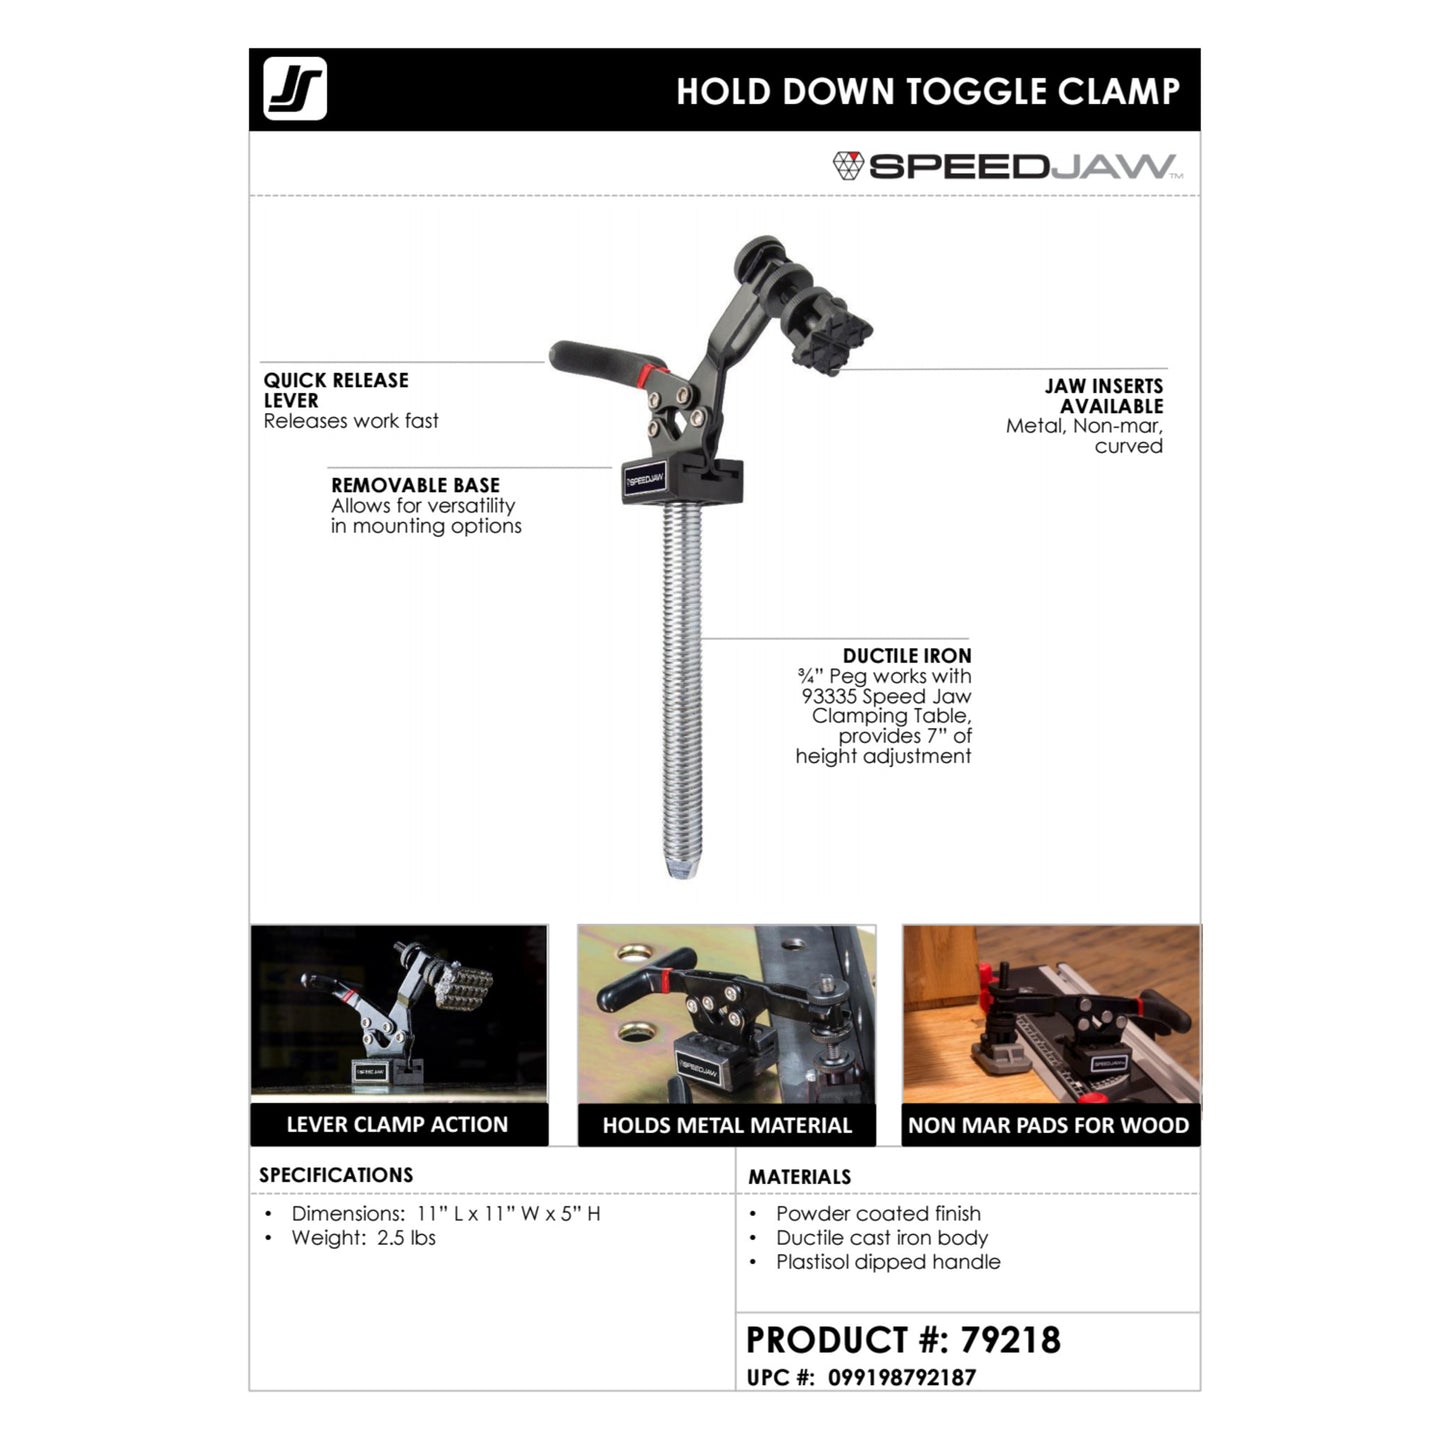 Hold-Down Toggle Clamp for SPEEDJAW Clamping Tables